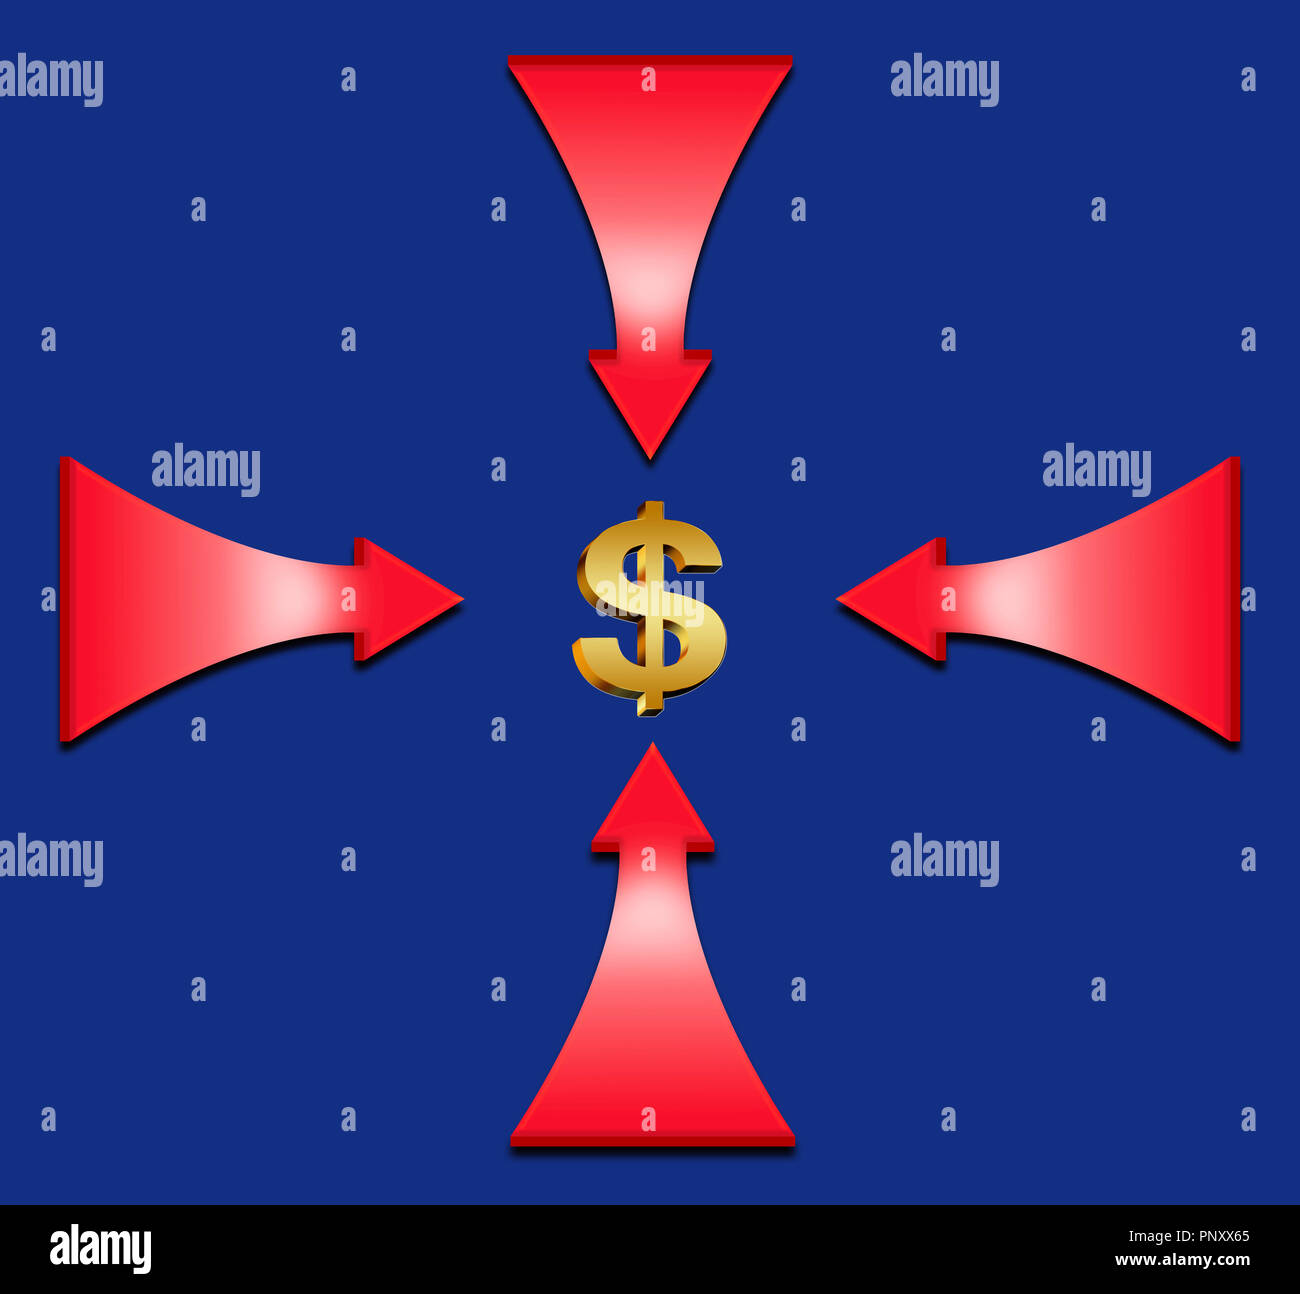 Arrows point to the same point indicating the object of interest. This is an illustration. Stock Photo